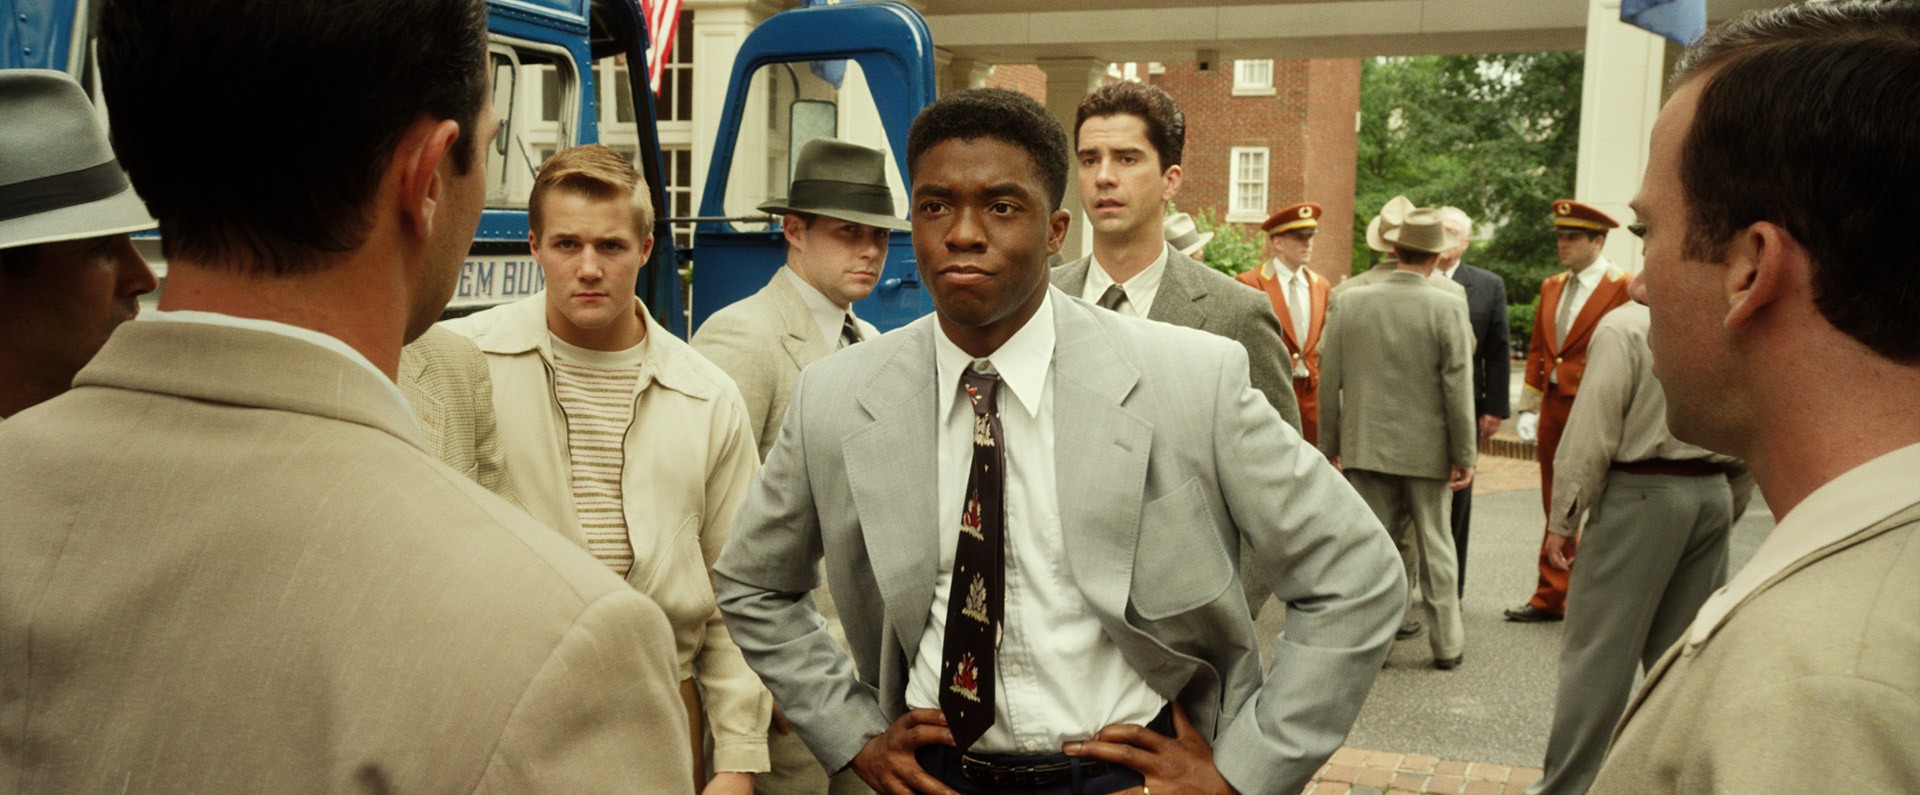 Lucas Black, Chadwick Boseman and Hamish Linklater in Warner Bros. Pictures' 42 (2013)